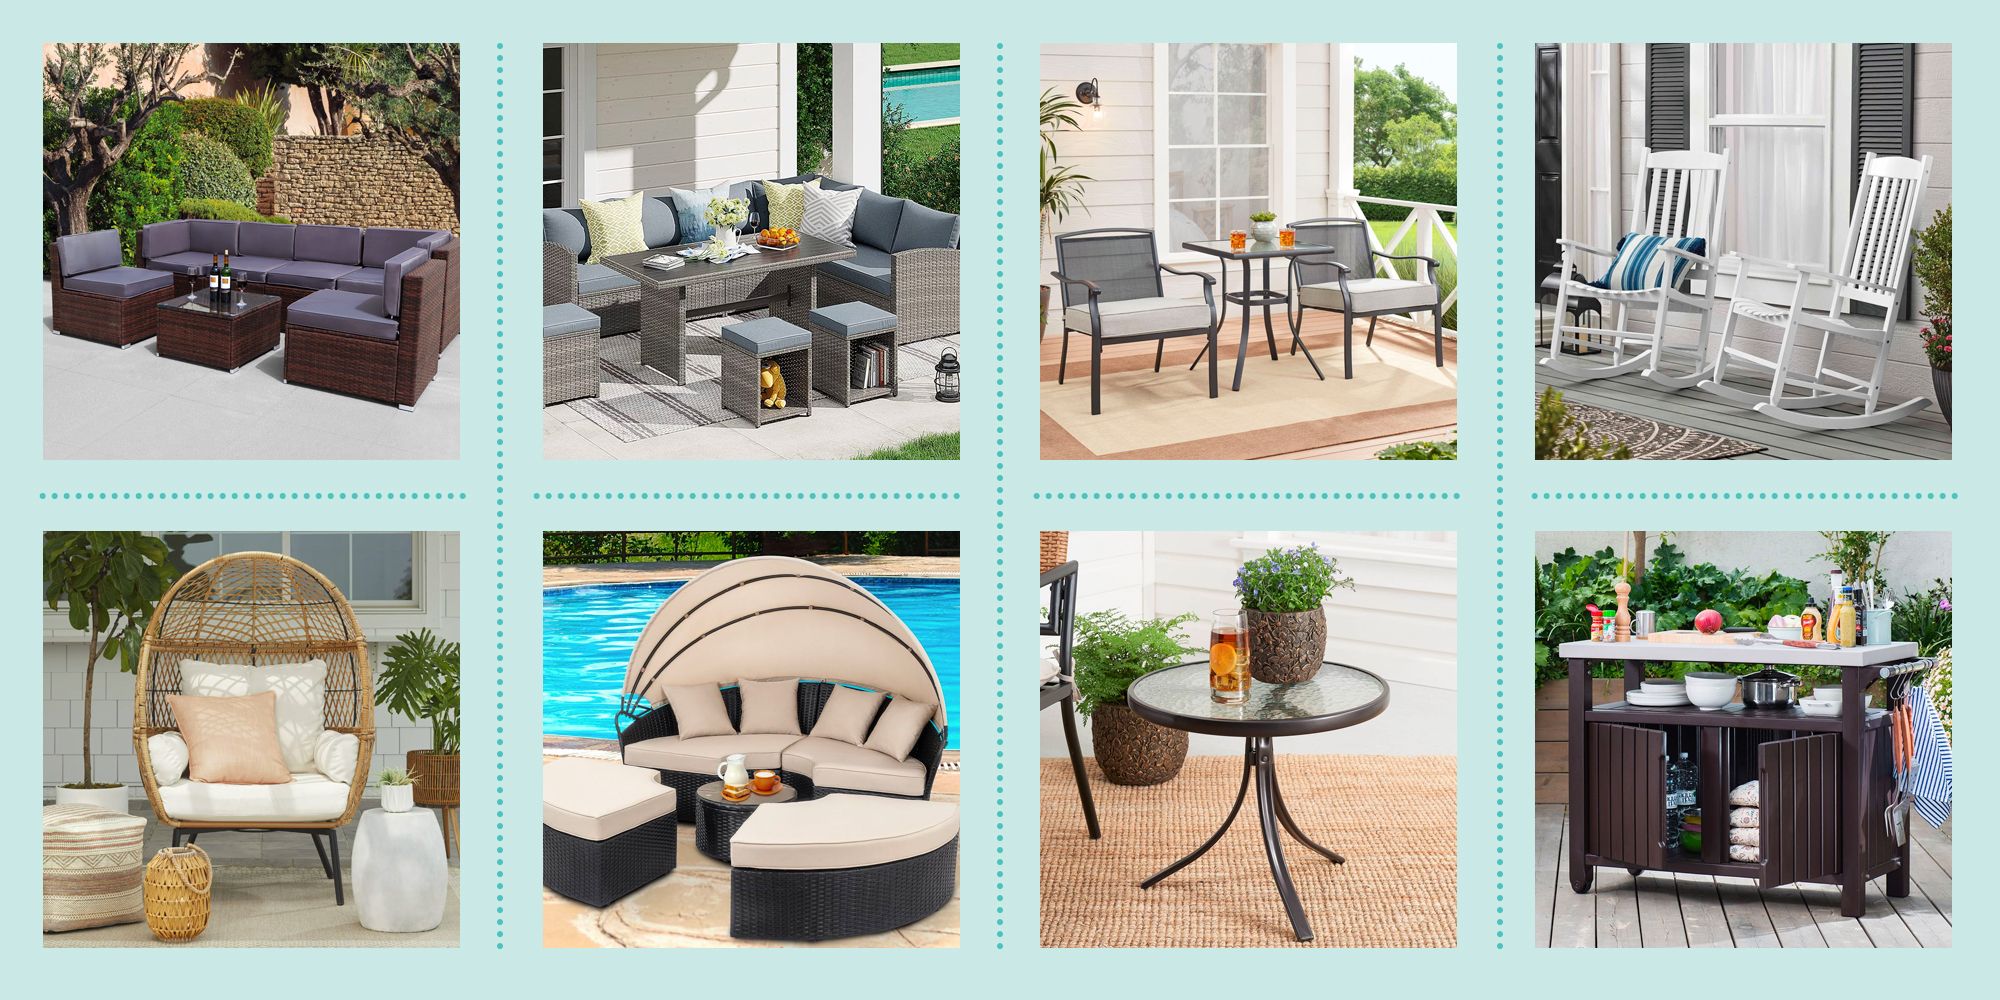 The Best Outdoor Furniture at Walmart to Revamp Your Patio